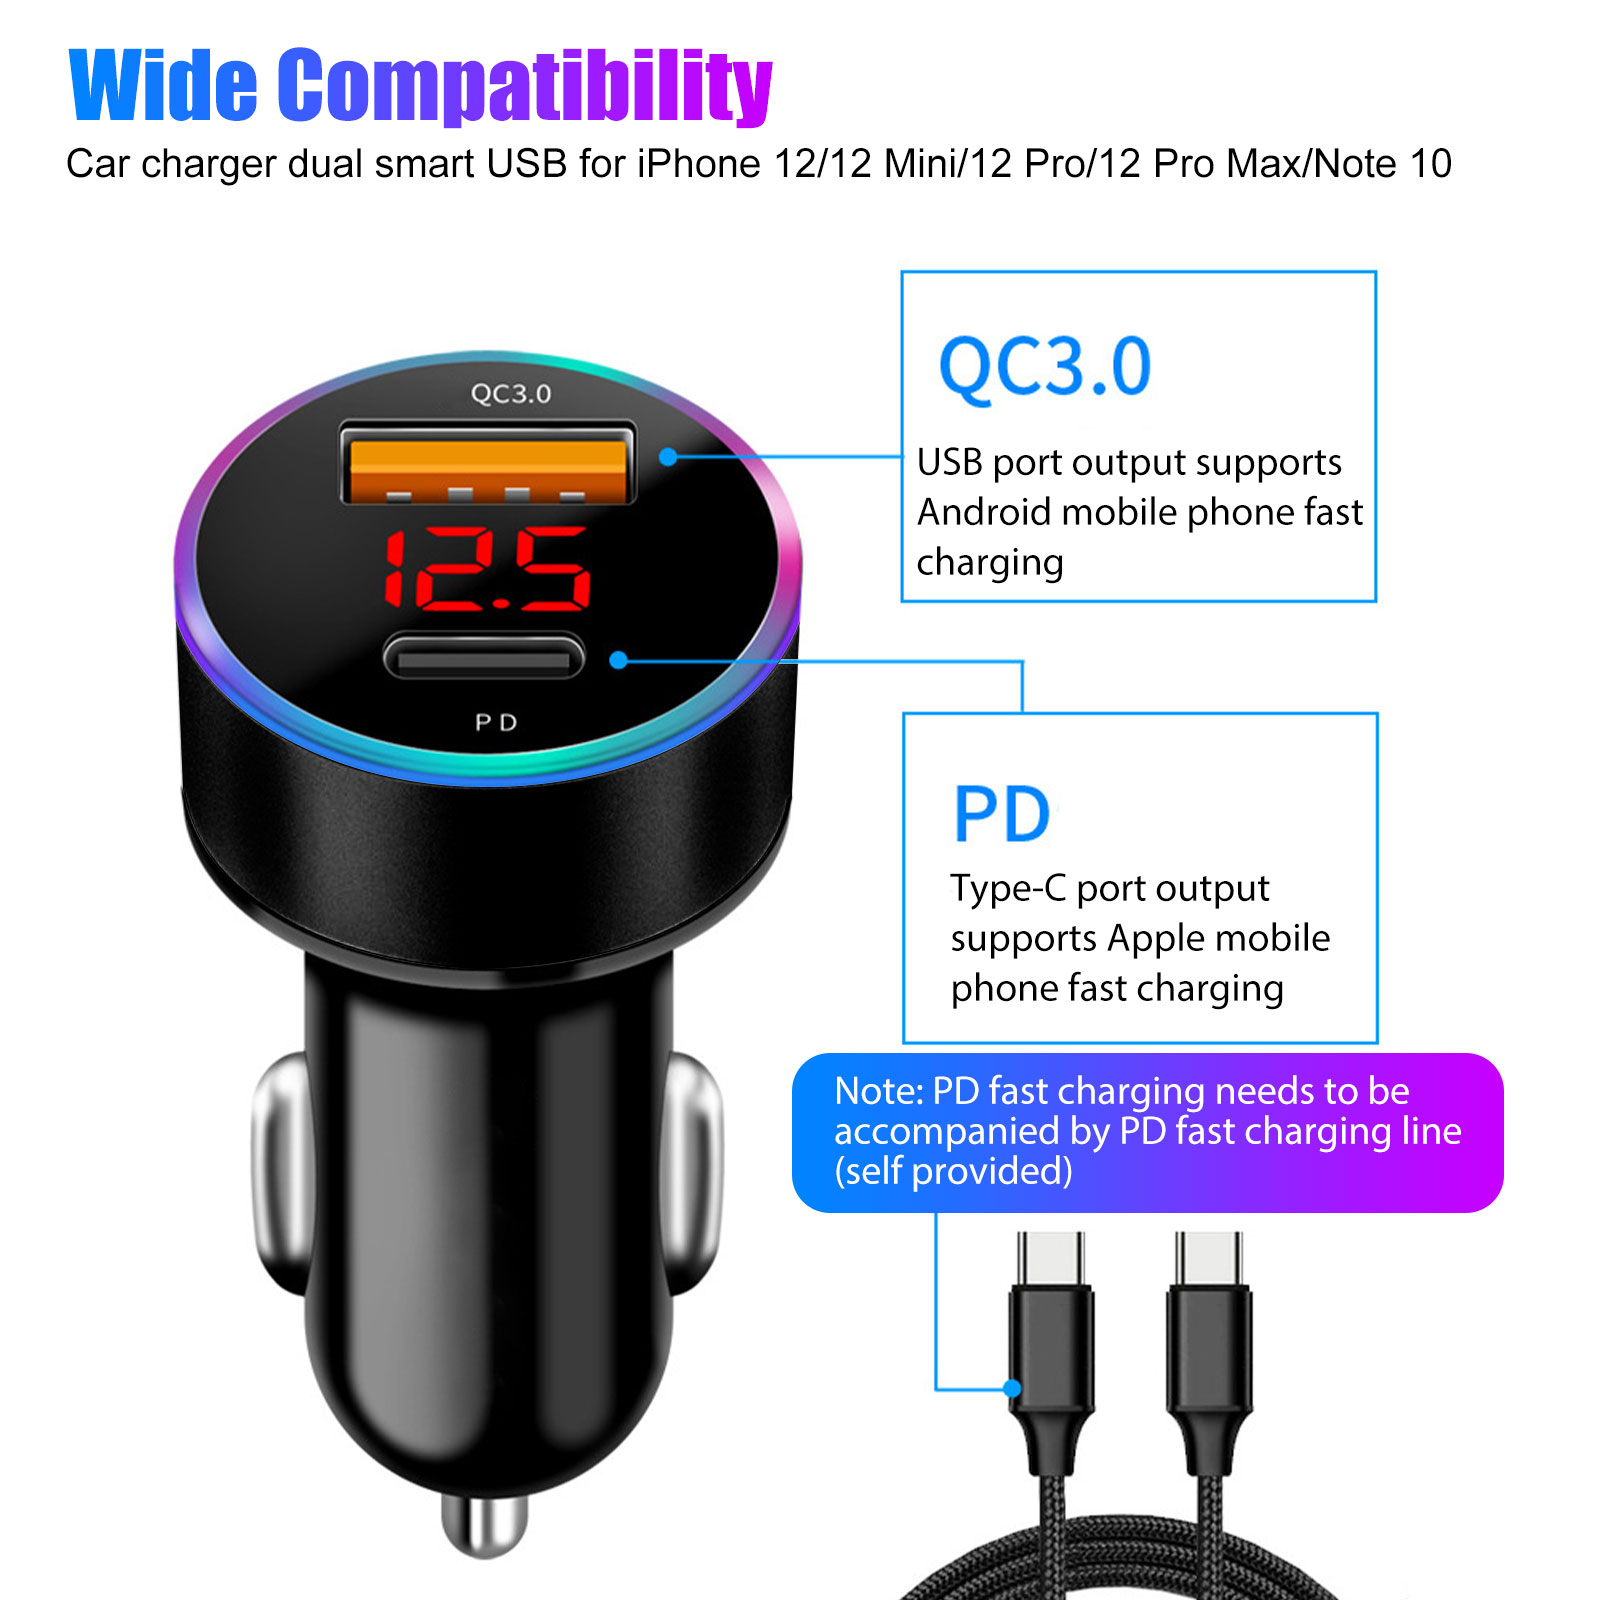 TSV USB C Car Charger, 36W Fast USB Car Charger PD QC 3.0 Dual Port Car Adapter, Mini Alloy USB Charger Compatible with iPhone 12, 12 Mini, 12 Pro, 12 Pro Max, 11 Pro Max, Pixel, Samsung - image 7 of 9